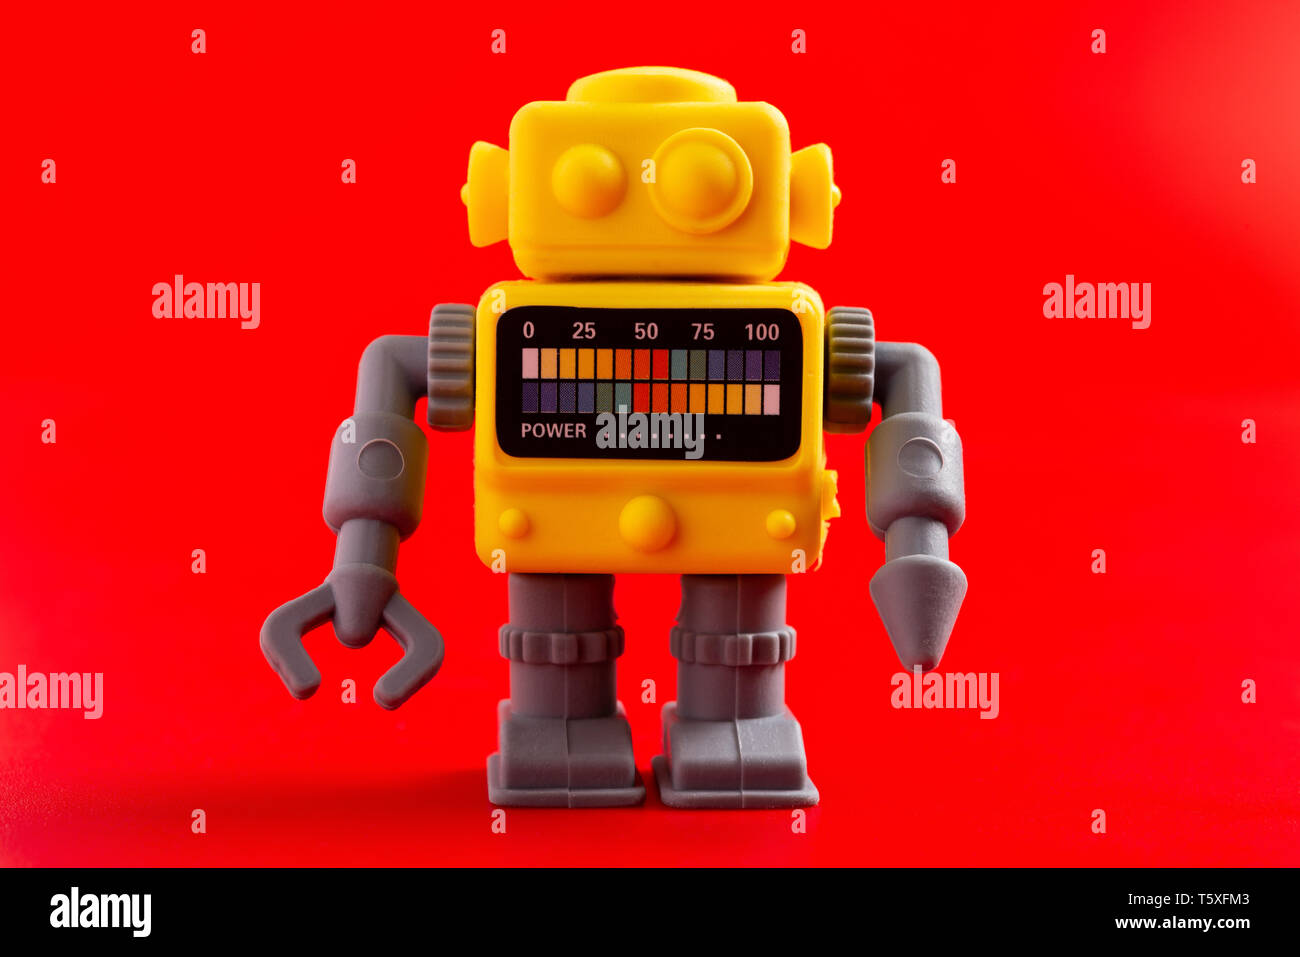 rubber toy robot on a red background Stock Photo